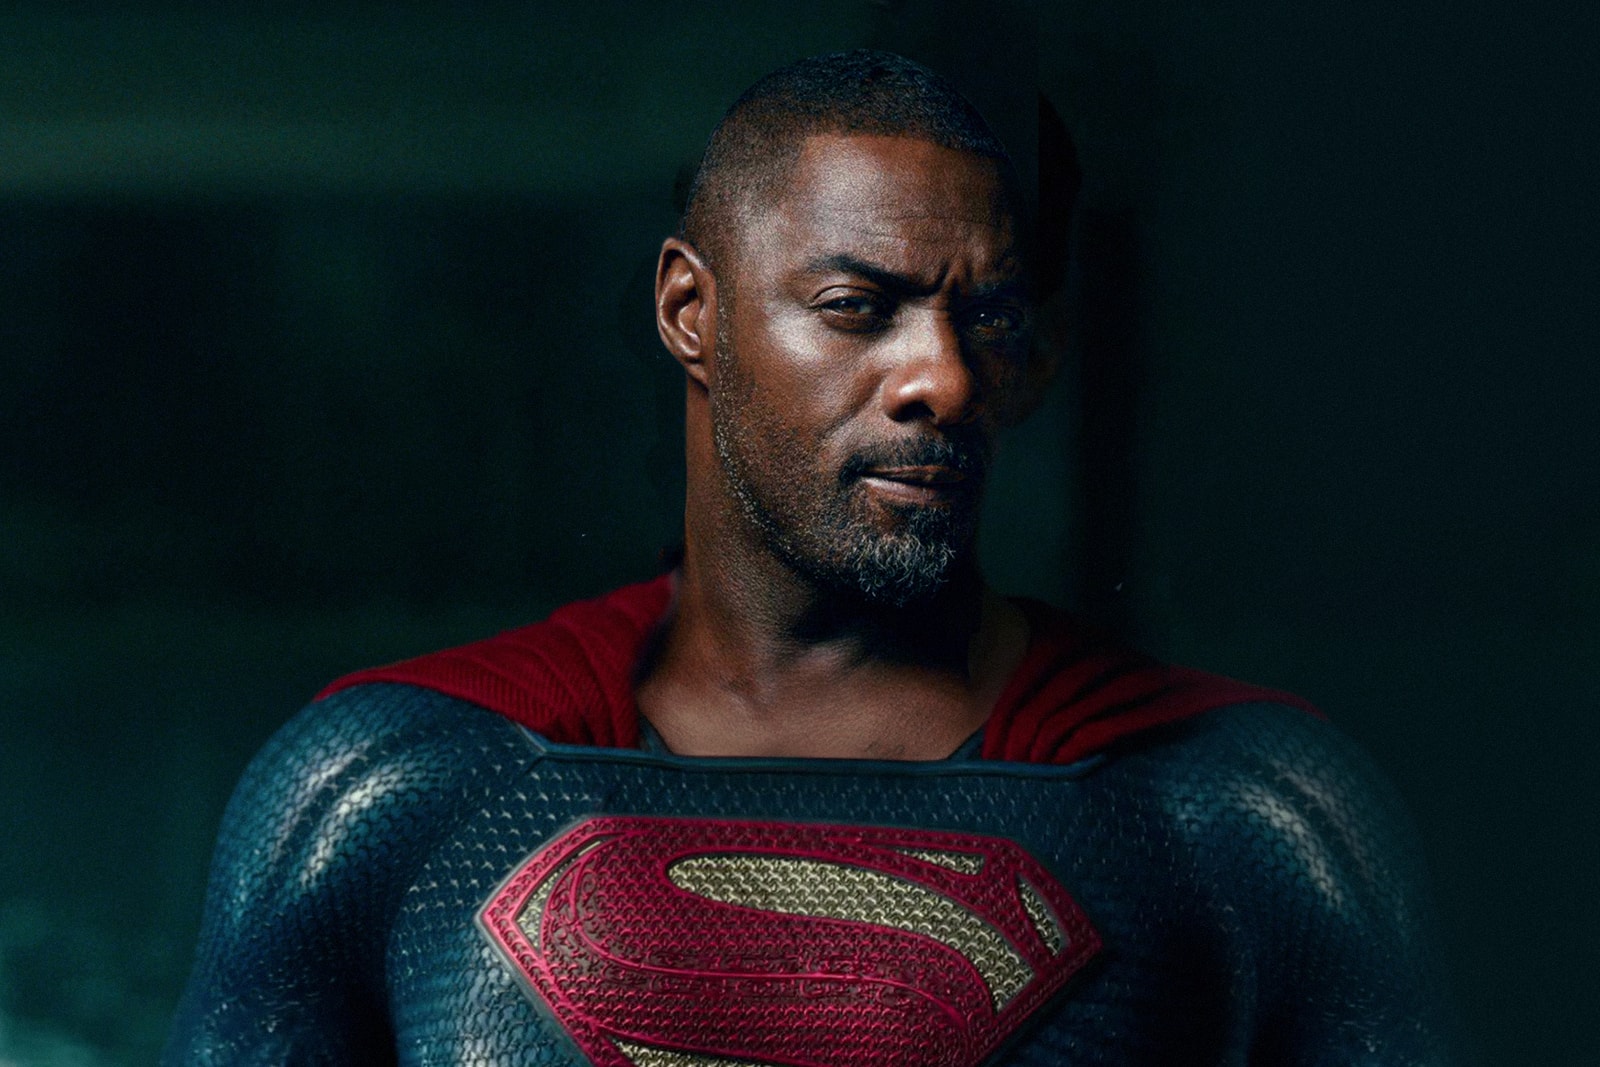 https%3A%2F%2Fhypebeast.com%2Fimage%2F2018%2F09%2F6-actors-we-want-to-see-replace-henry-cavill-as-superman-idris-elba.jpg?w=1600&cbr=1&q=90&fit=max